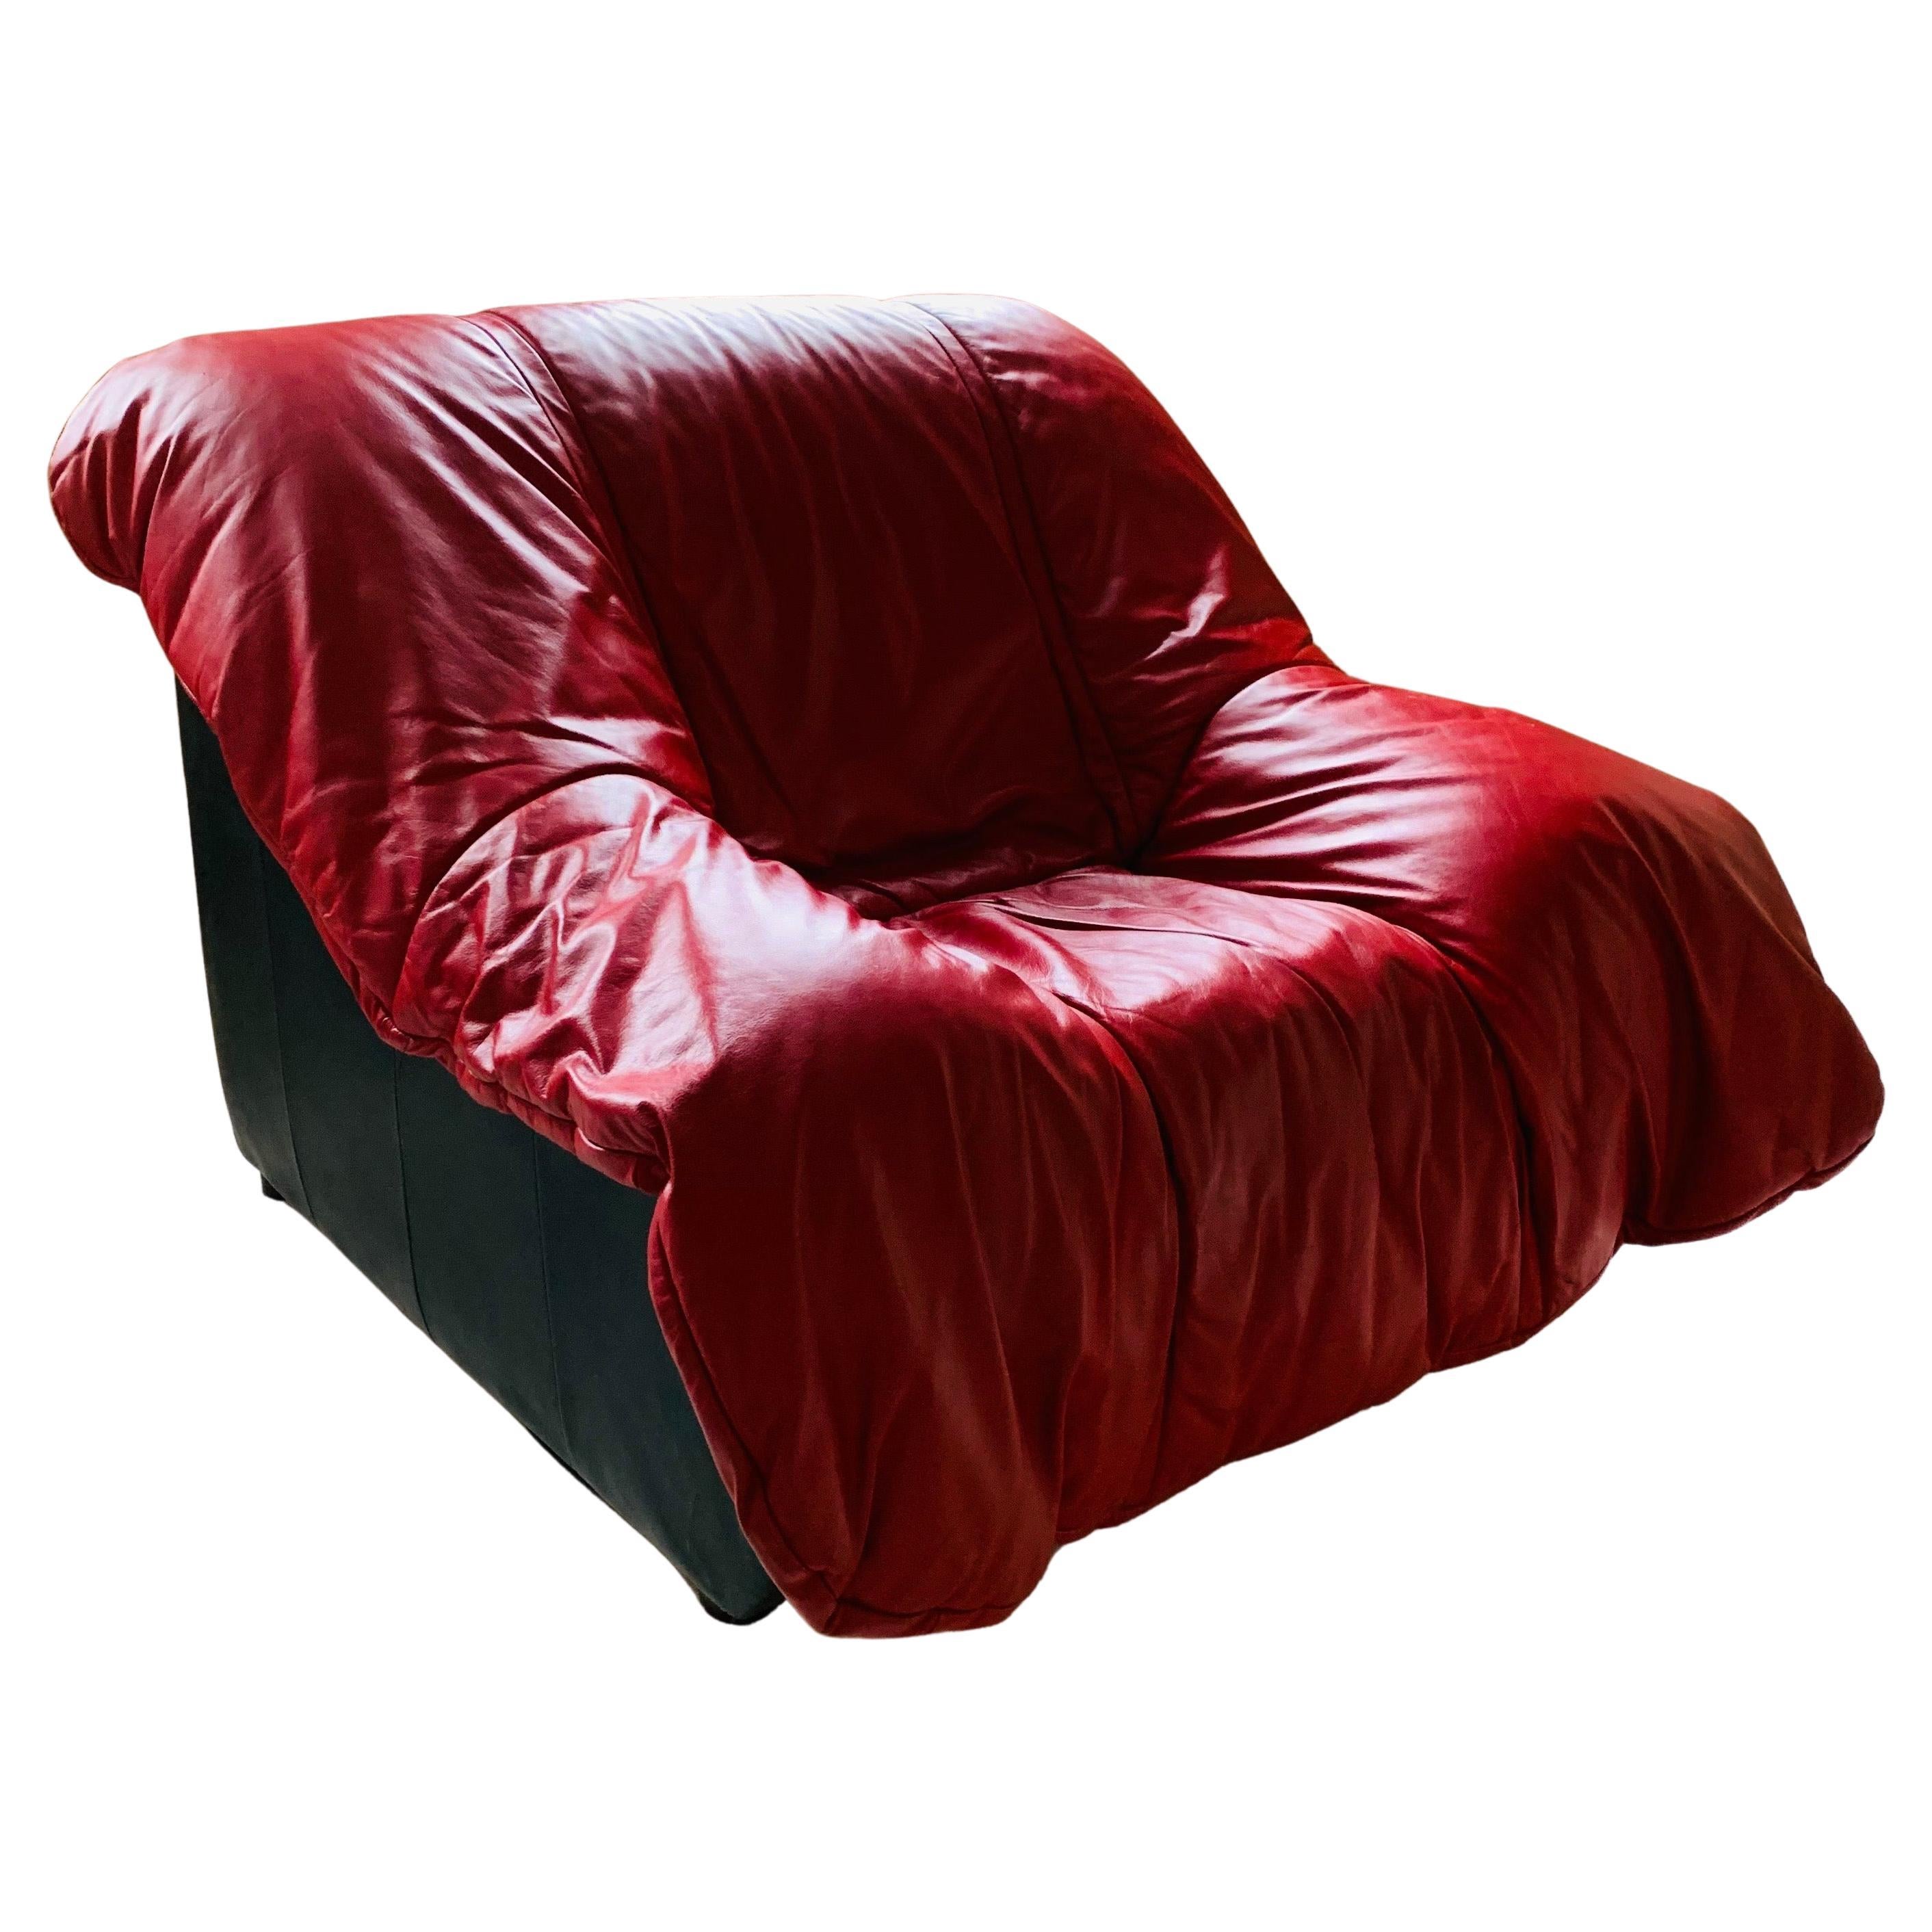 Post-Modern "Flou-Flou" Chair in Red Leather, Ligne Roset, 1992